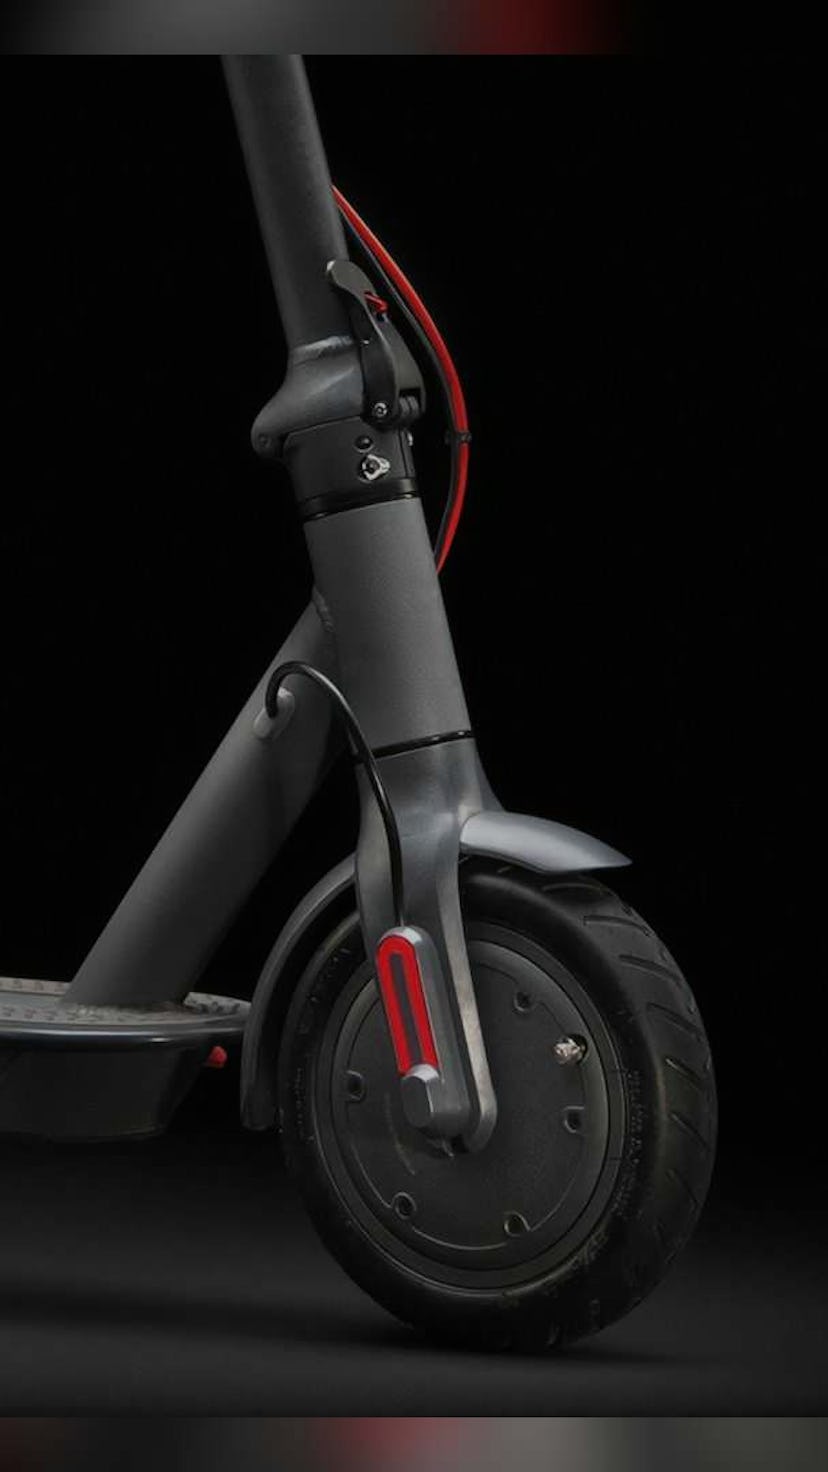 A closer look at the motor of the Pro-I Evo. Electric scooter. E-scooter. EV. EVs. Electric vehicles...